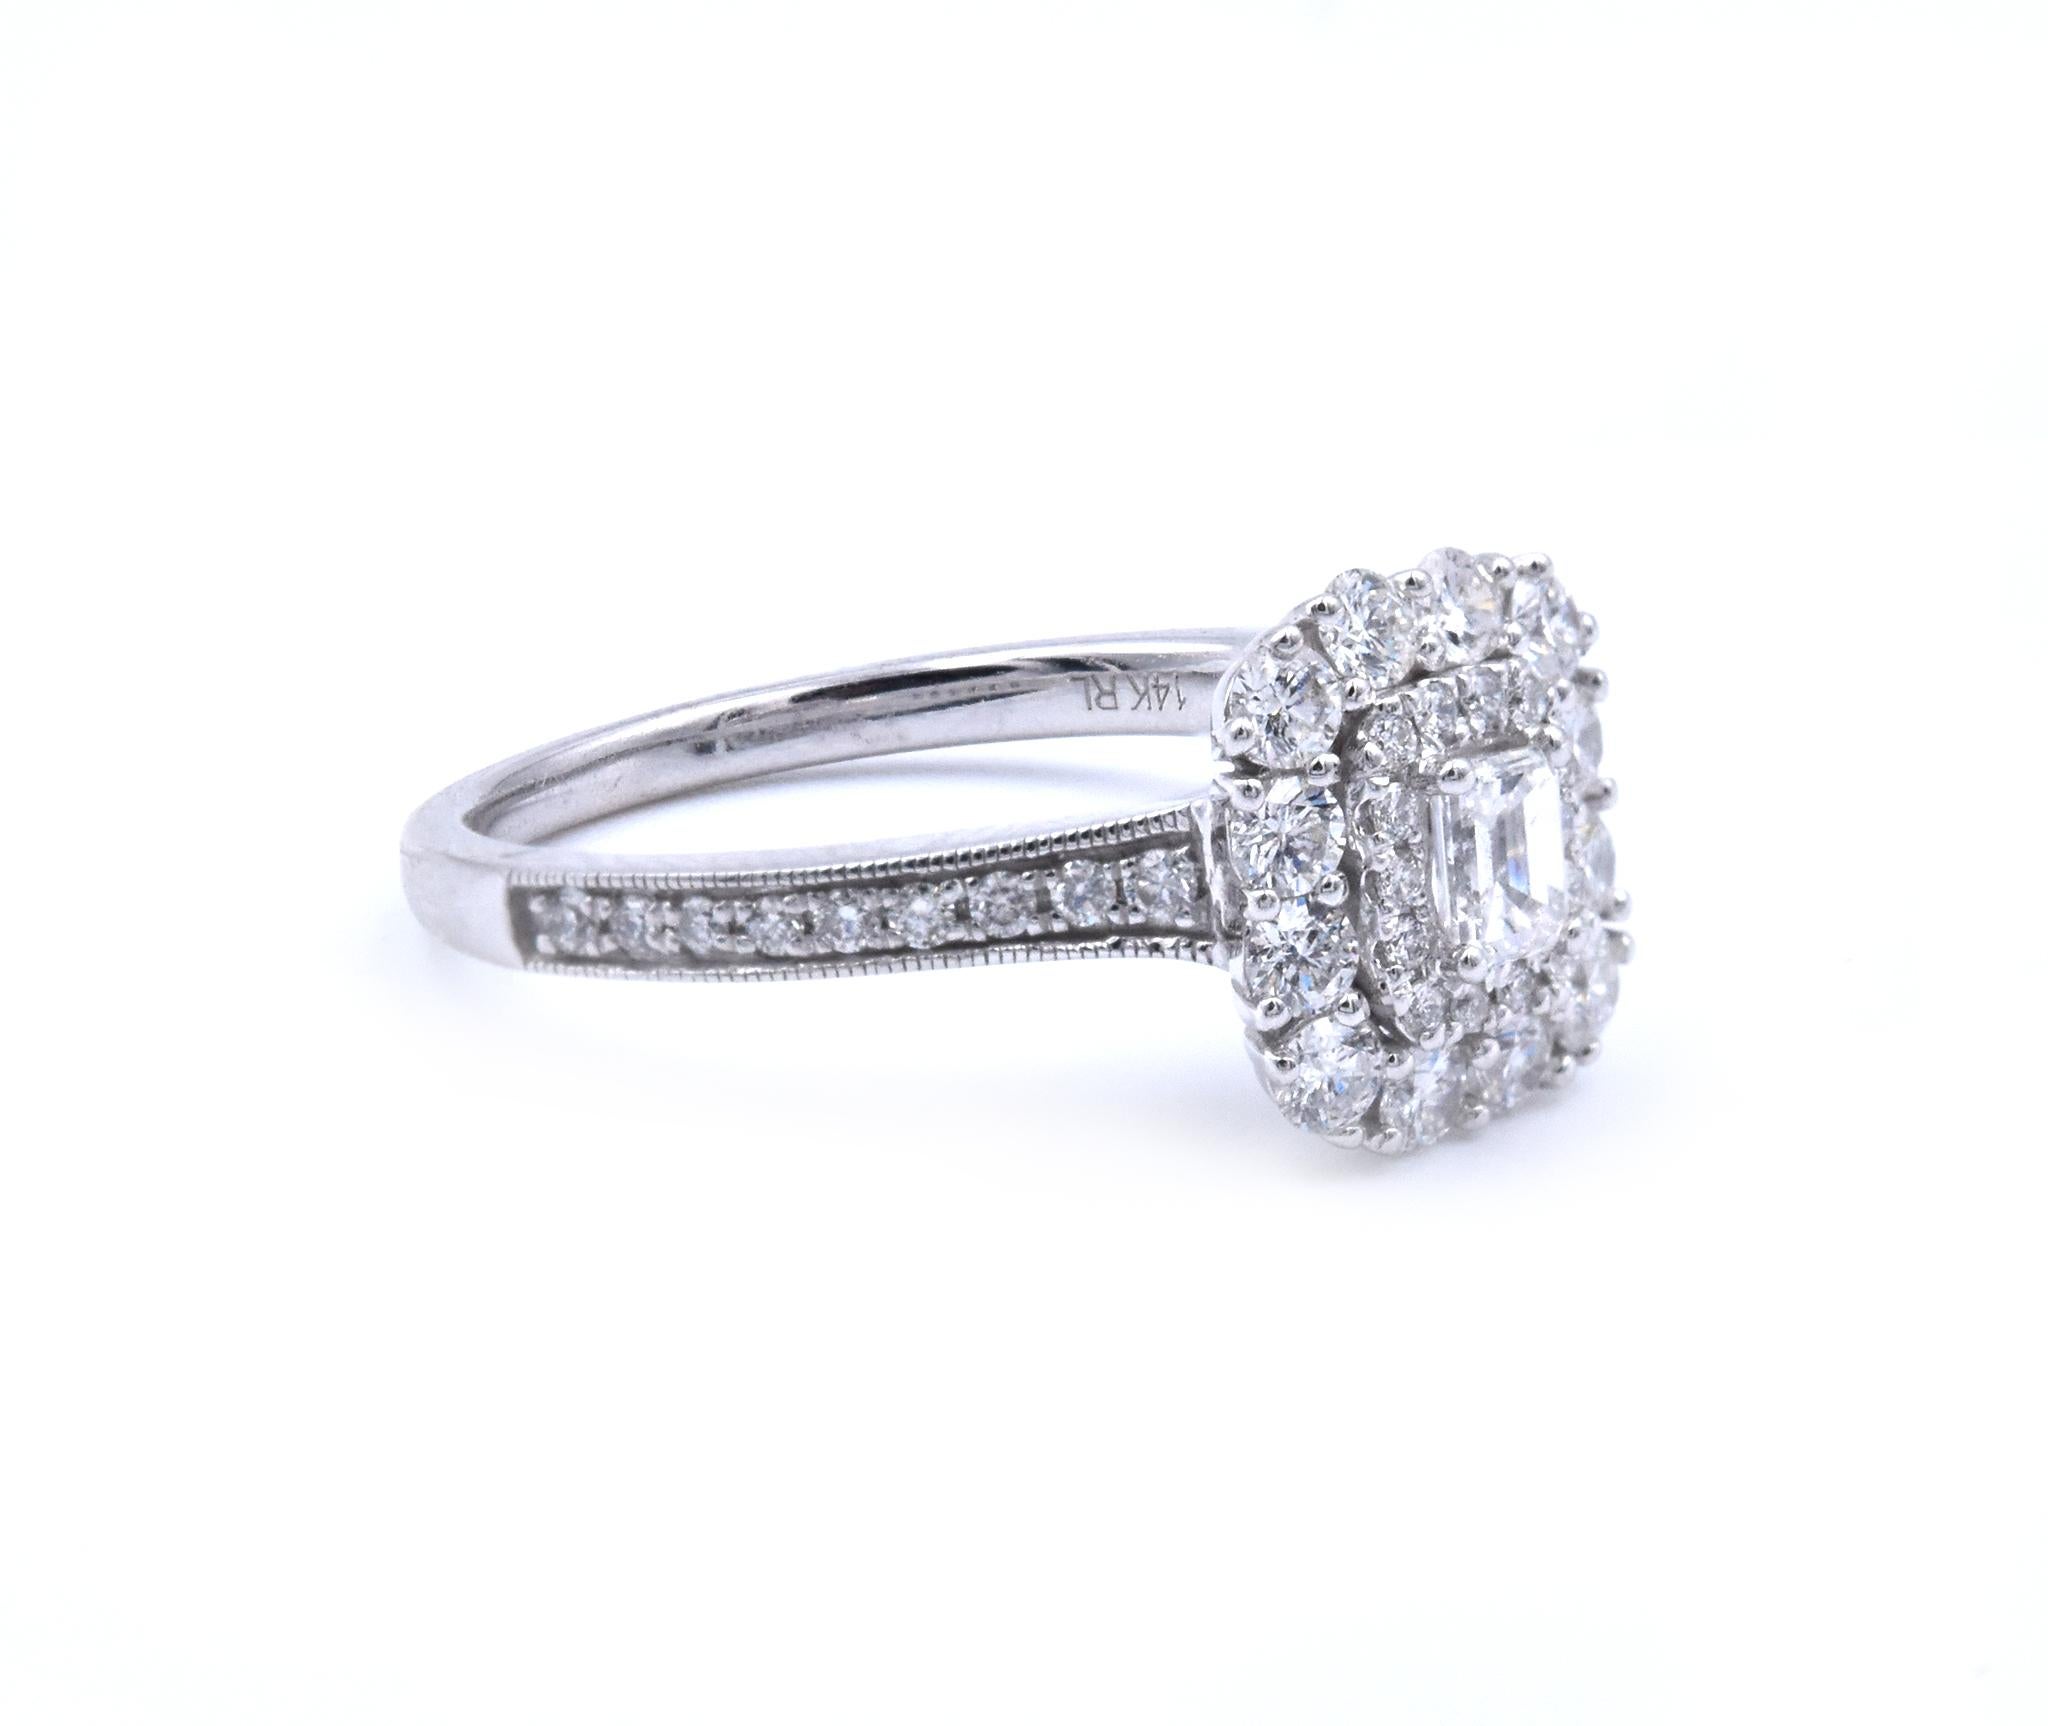 Material: 14k white gold
Center Diamond: 1 emerald cut = .15ct
Color: G
Clarity: VS1
Diamonds: 48 round brilliant cut = .57cttw
Color: G
Clarity: VS1
Ring Size: 7 (please allow up to 2 additional business days for sizing requests)
Dimensions: ring